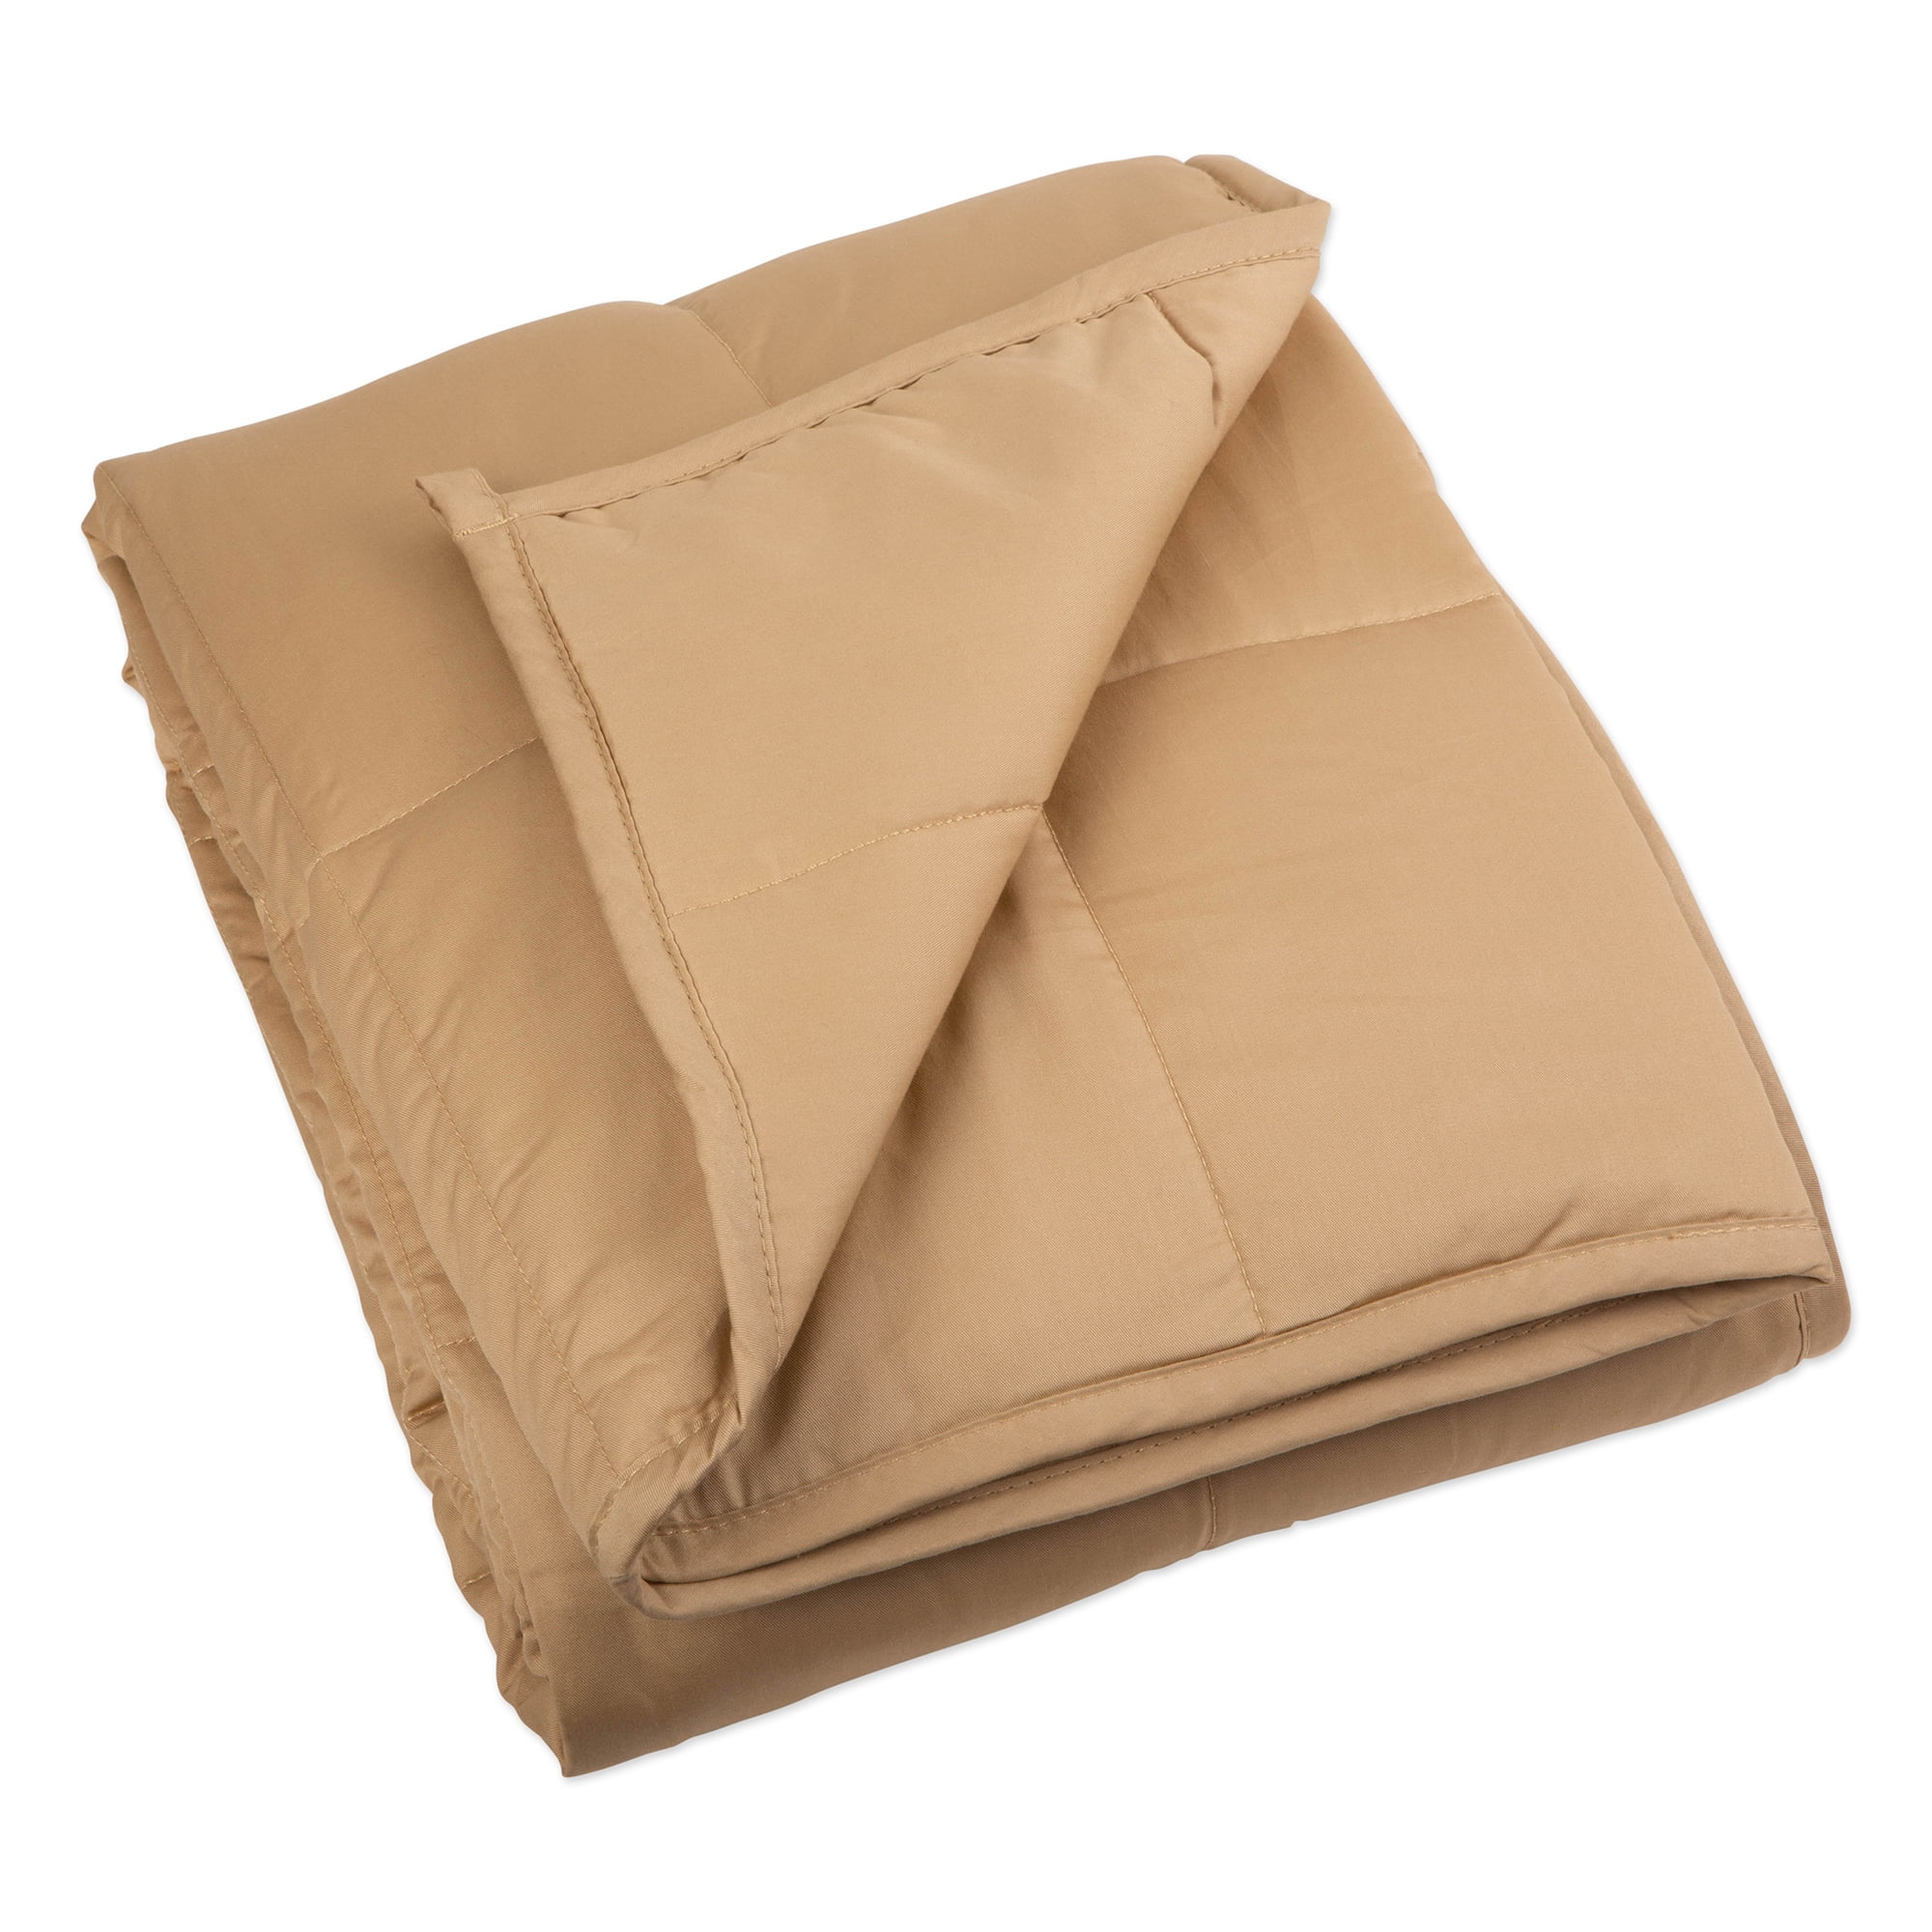 Z02279 7 Lbs Weighted Blanket, Taupe - 41 X 60 In.